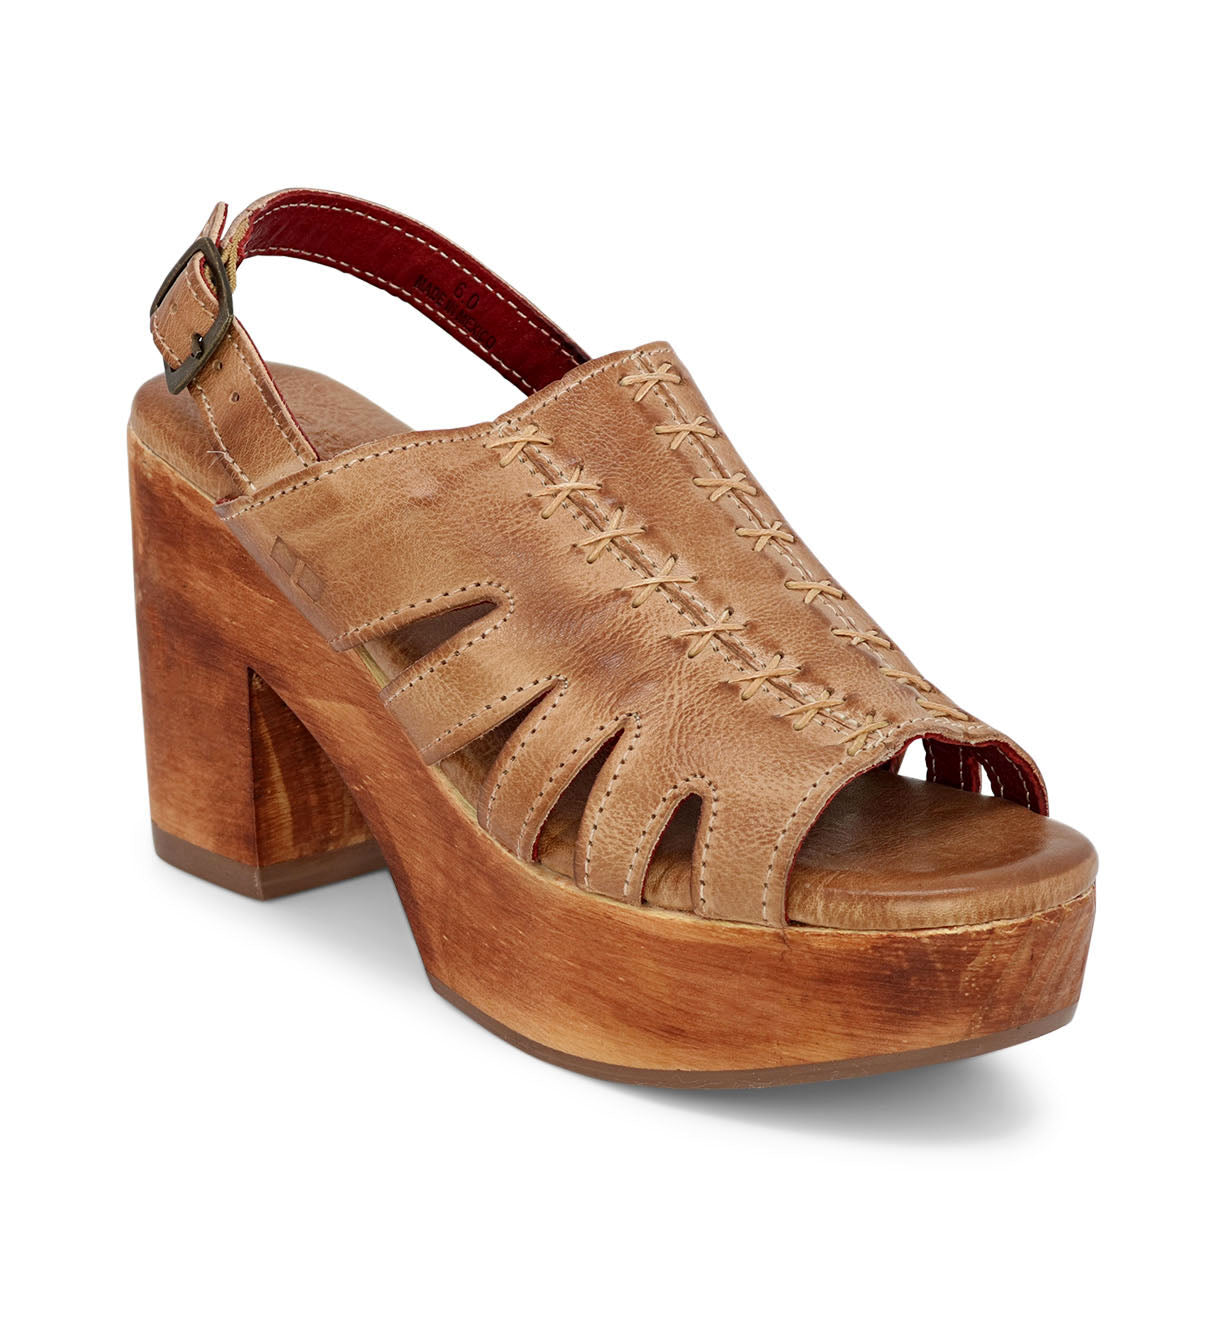 A women's Fontella sandal with a wooden heel by Bed Stu.